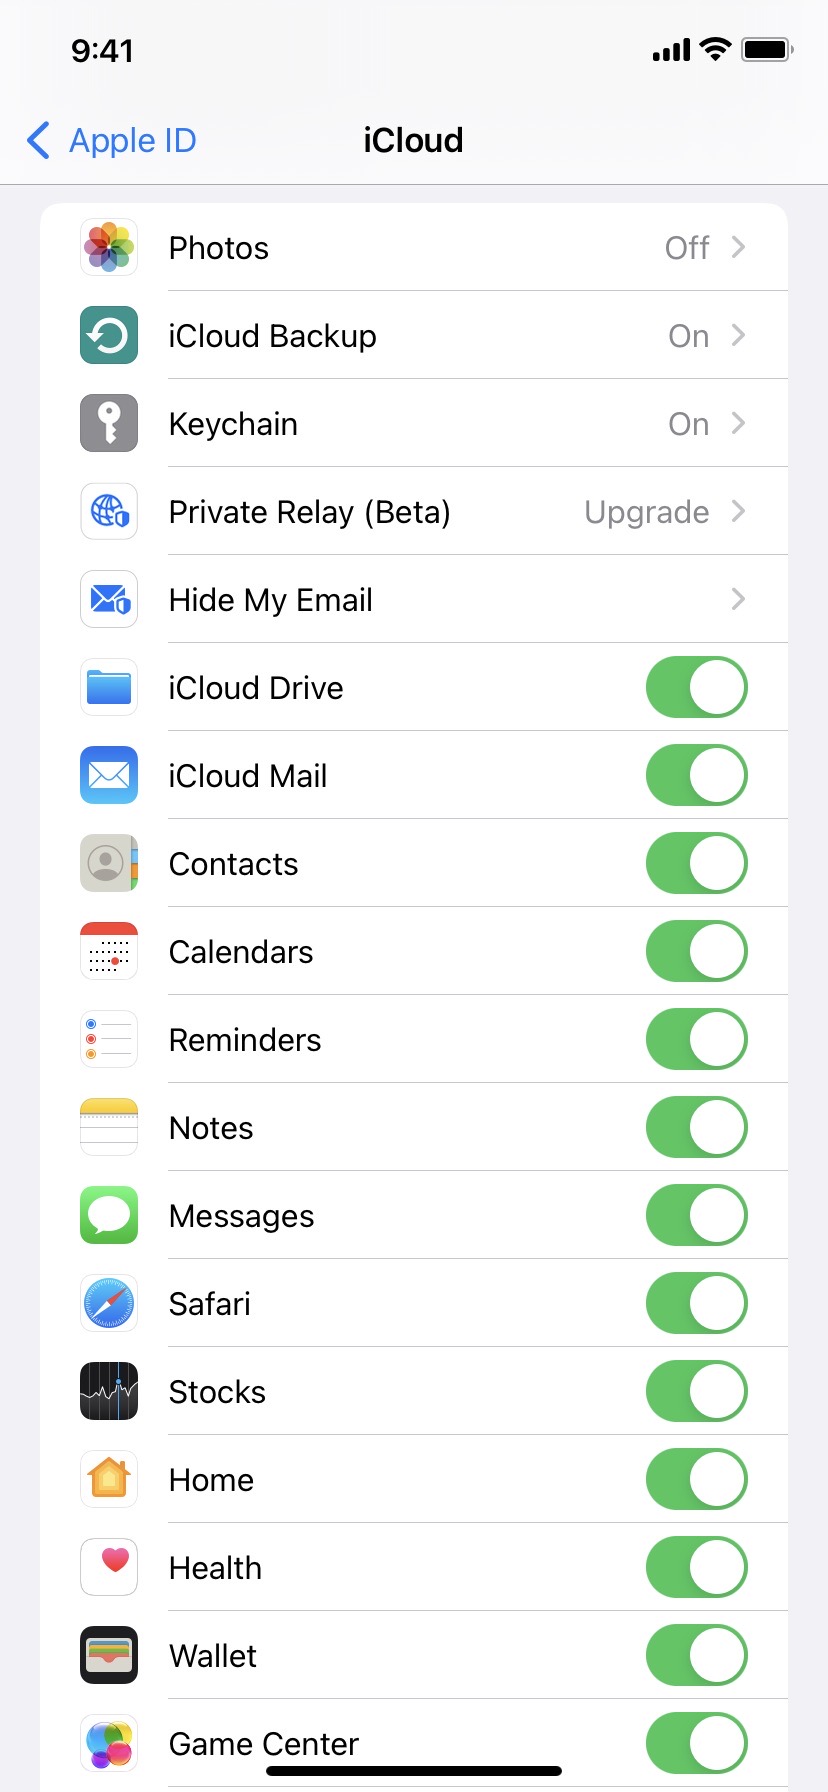 iPhone iCloud Settings with Notes, Calendars, Reminders, Passwords, and more enabled